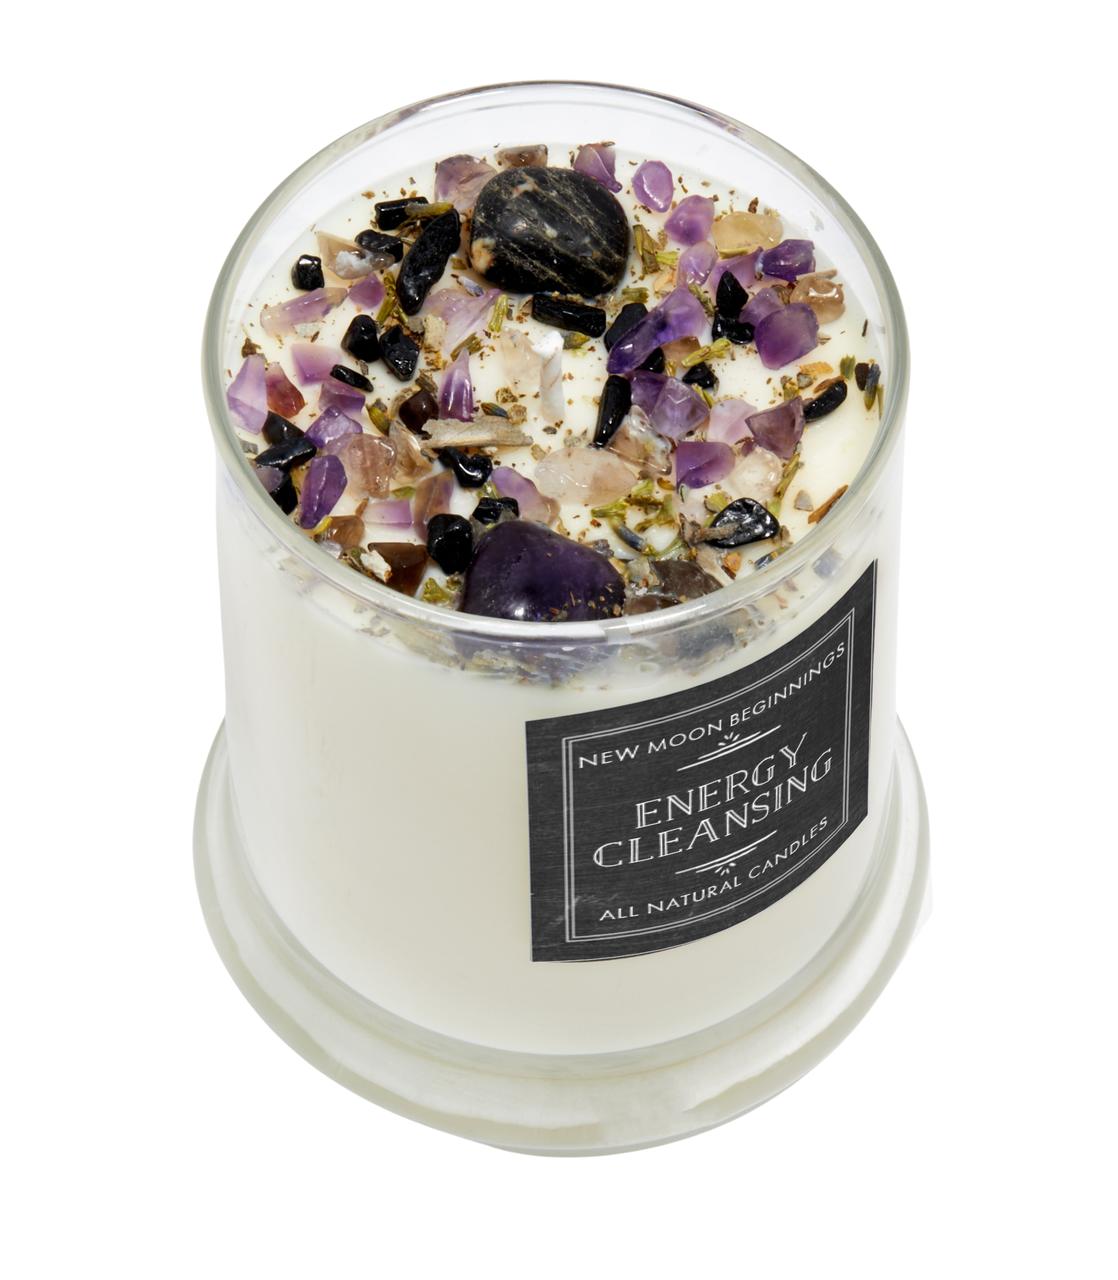 Crystal Candle, Chakra Candle, Spiritual Candle, Intentional Meditation Candles, Candles with Crystals Inside, Manifestation Candle, Healing Stones